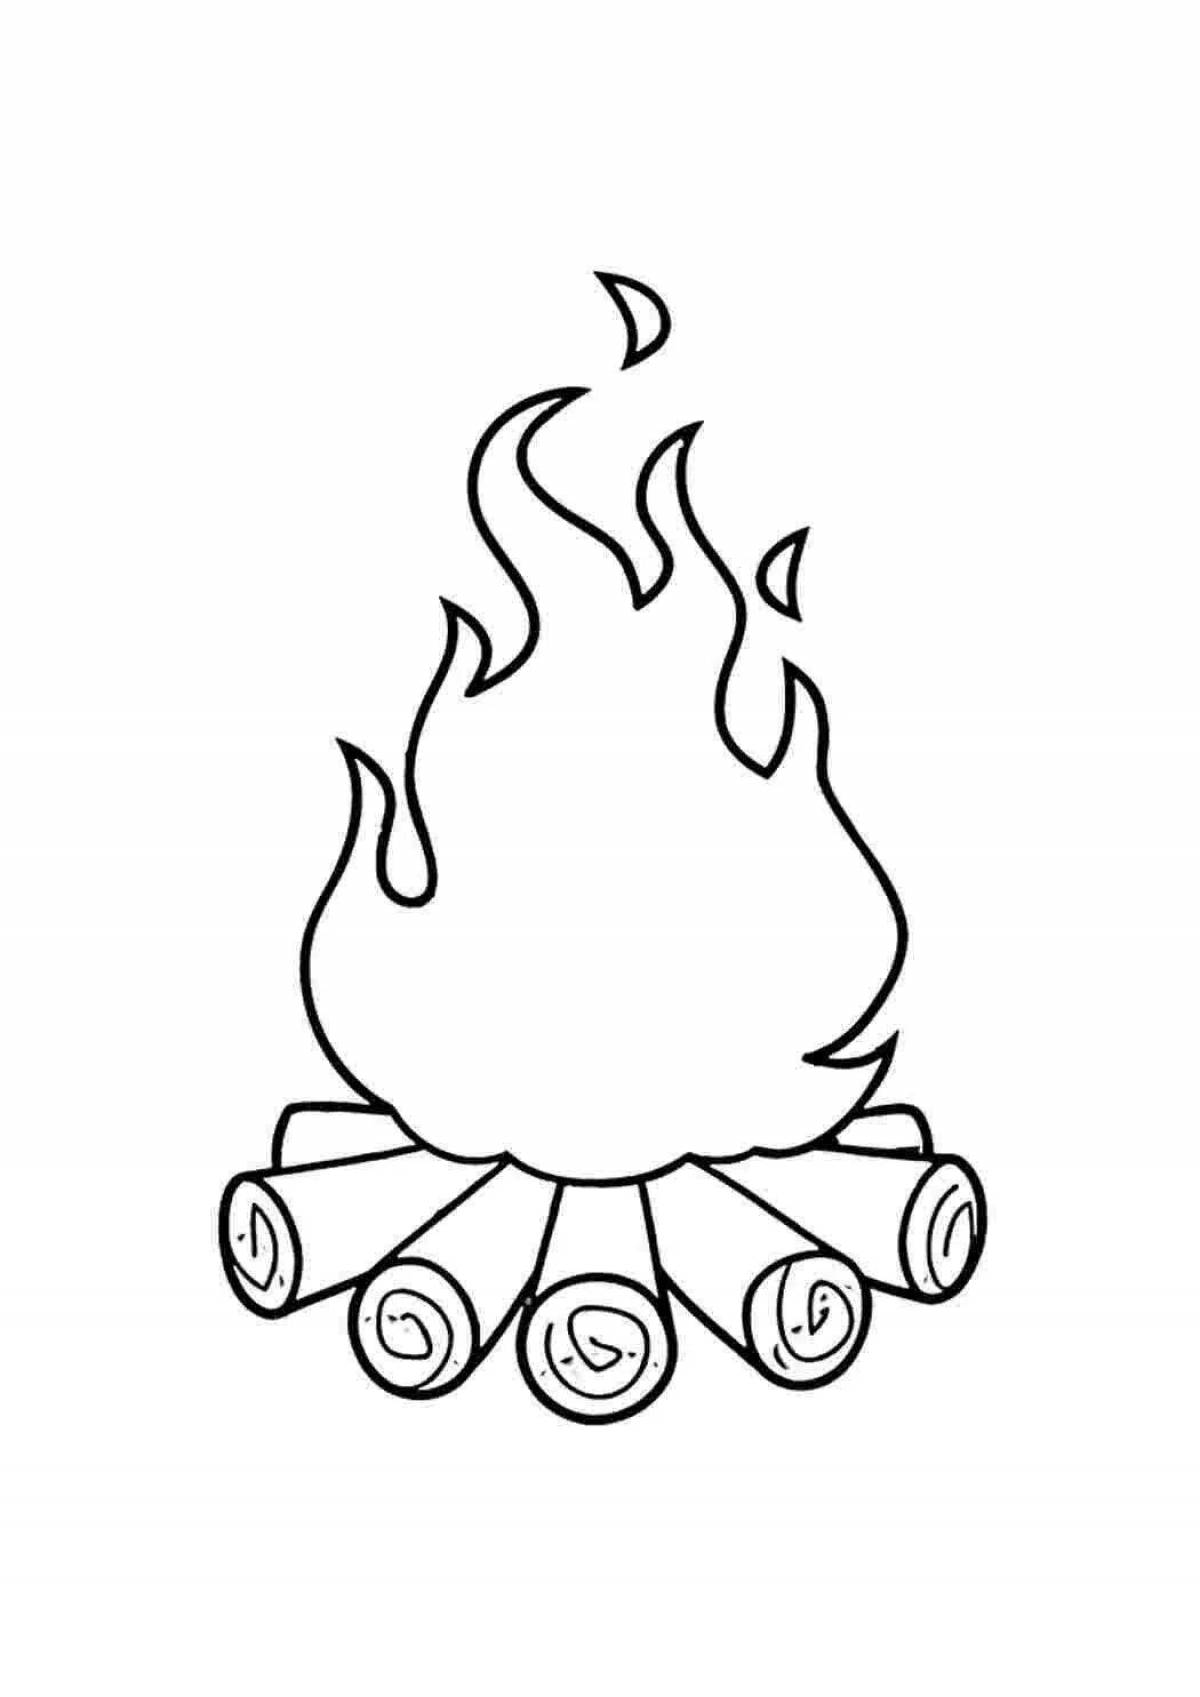 Amazing flame coloring page for kids